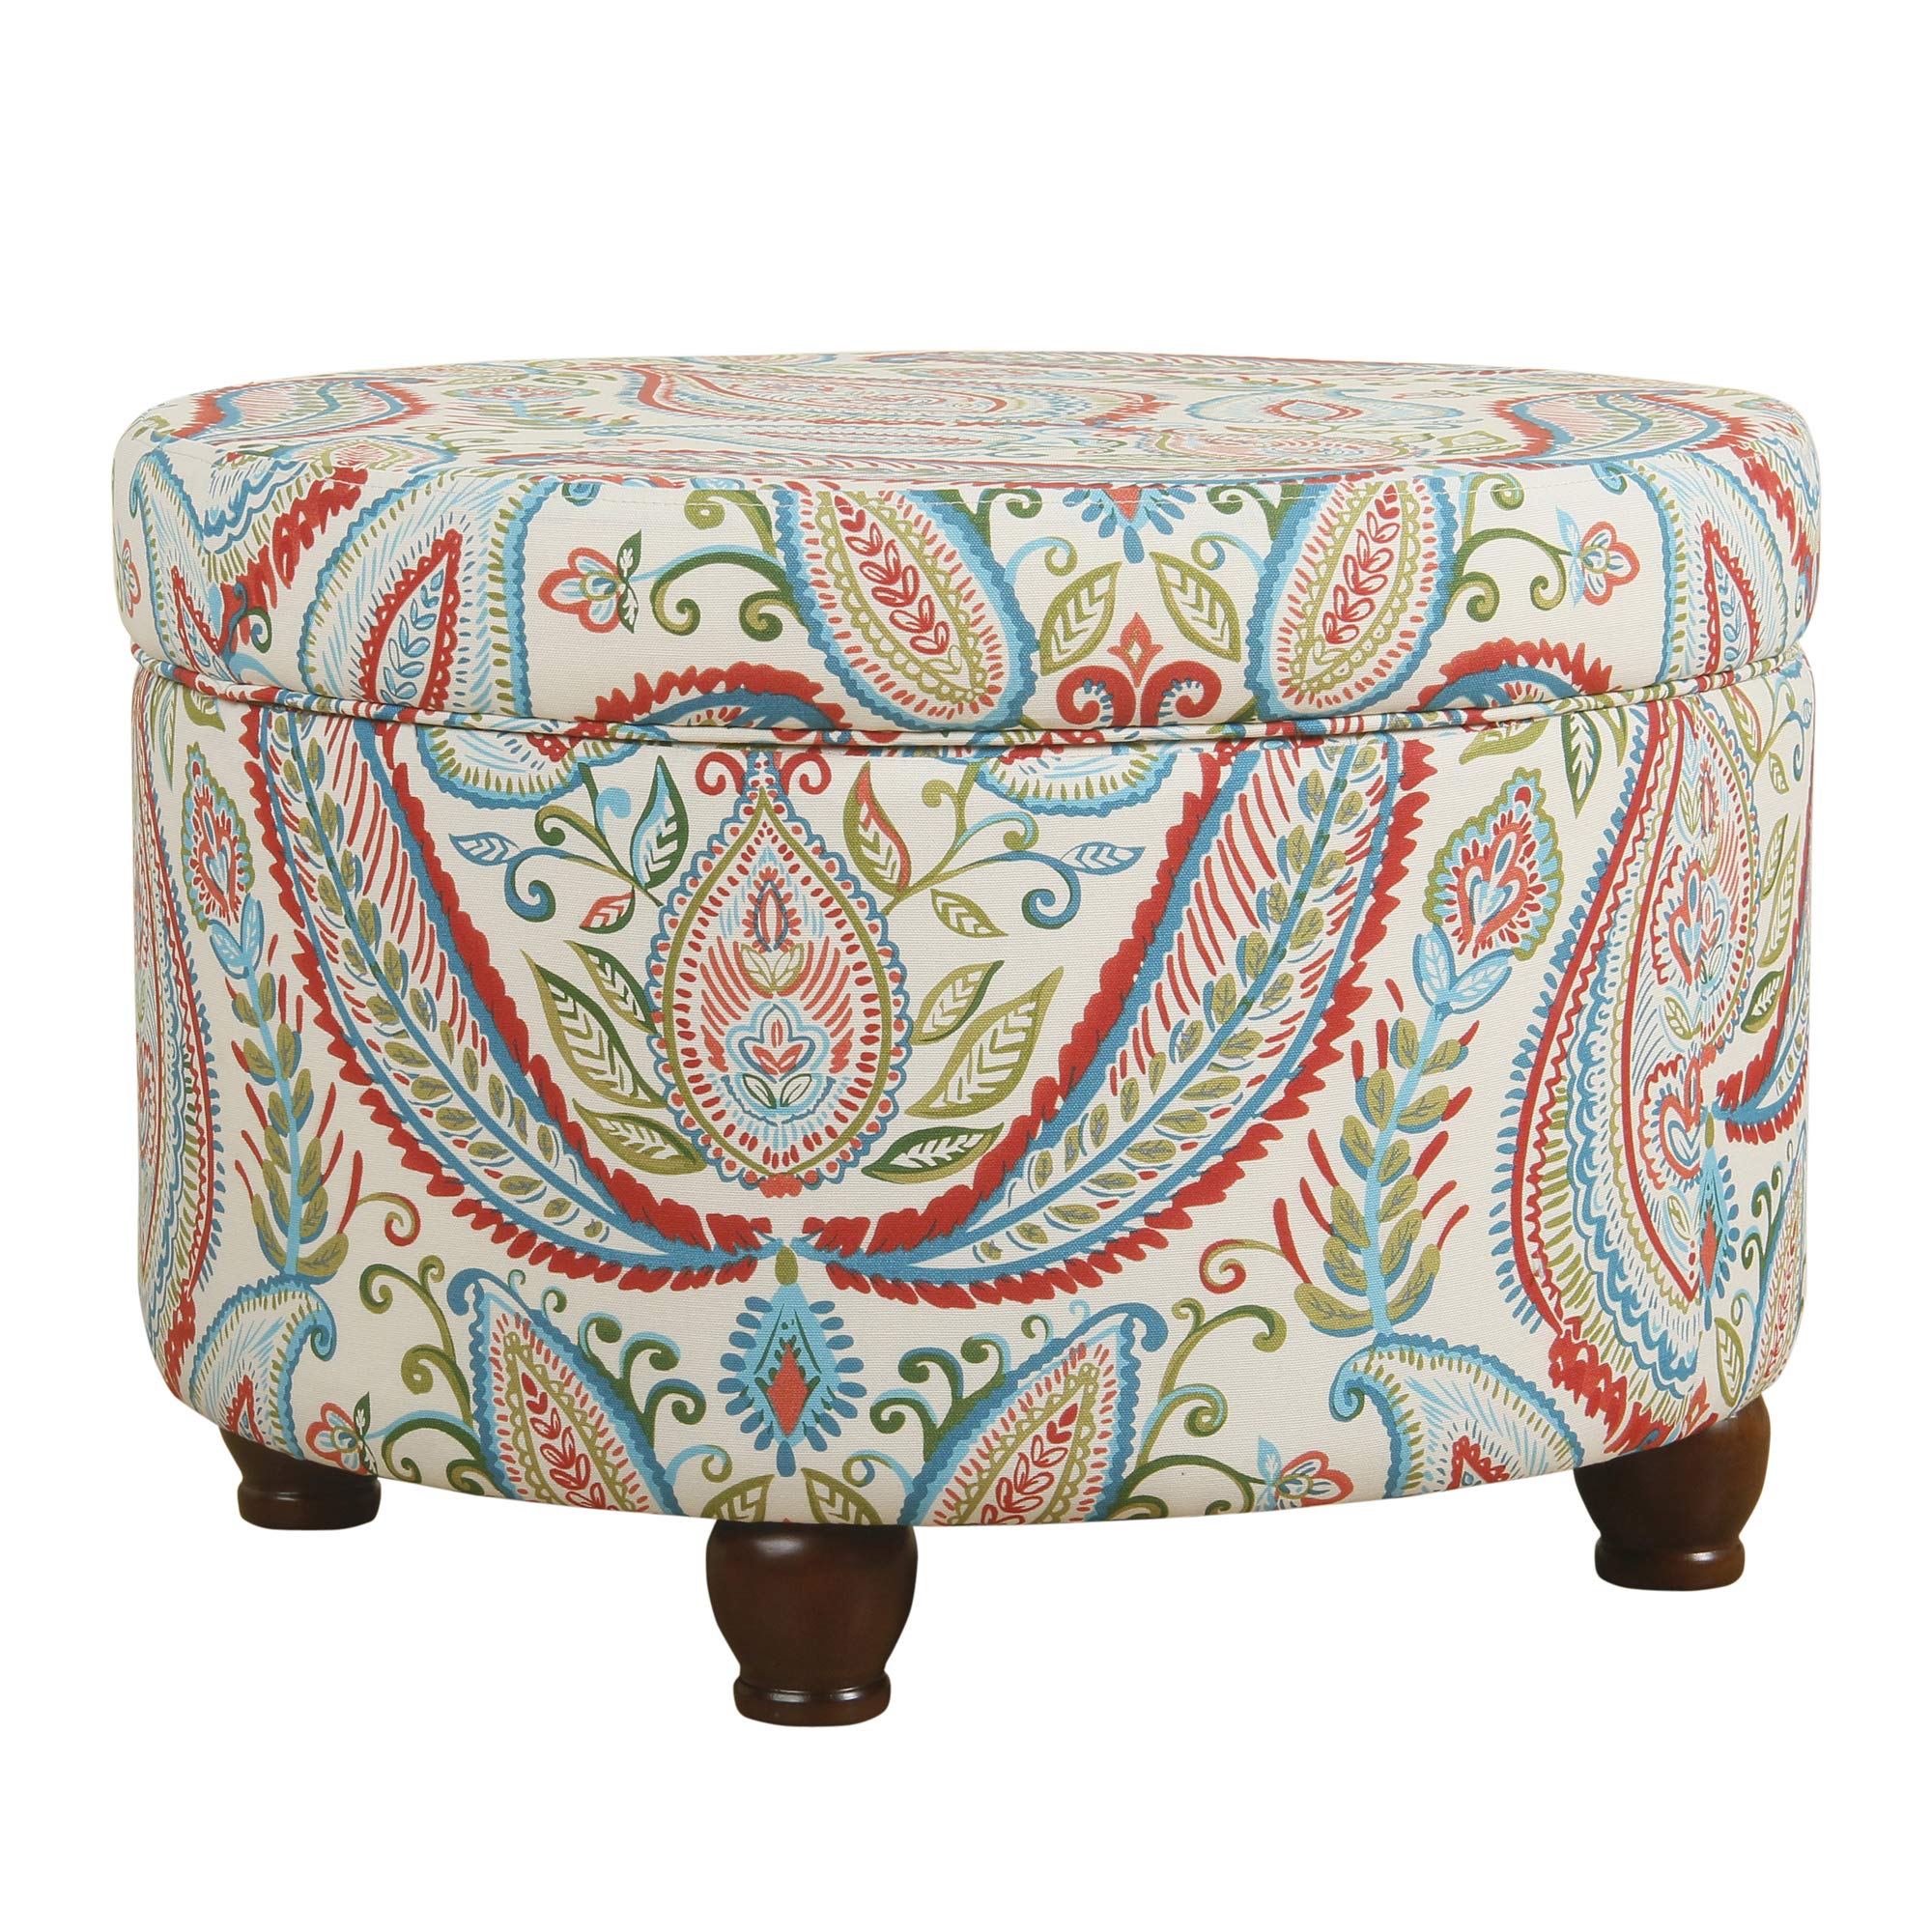 Homepop Home Decor | Upholstered Round Storage Ottoman | Ottoman with Storage for Living Room & Bedroom, Bold Paisley Large